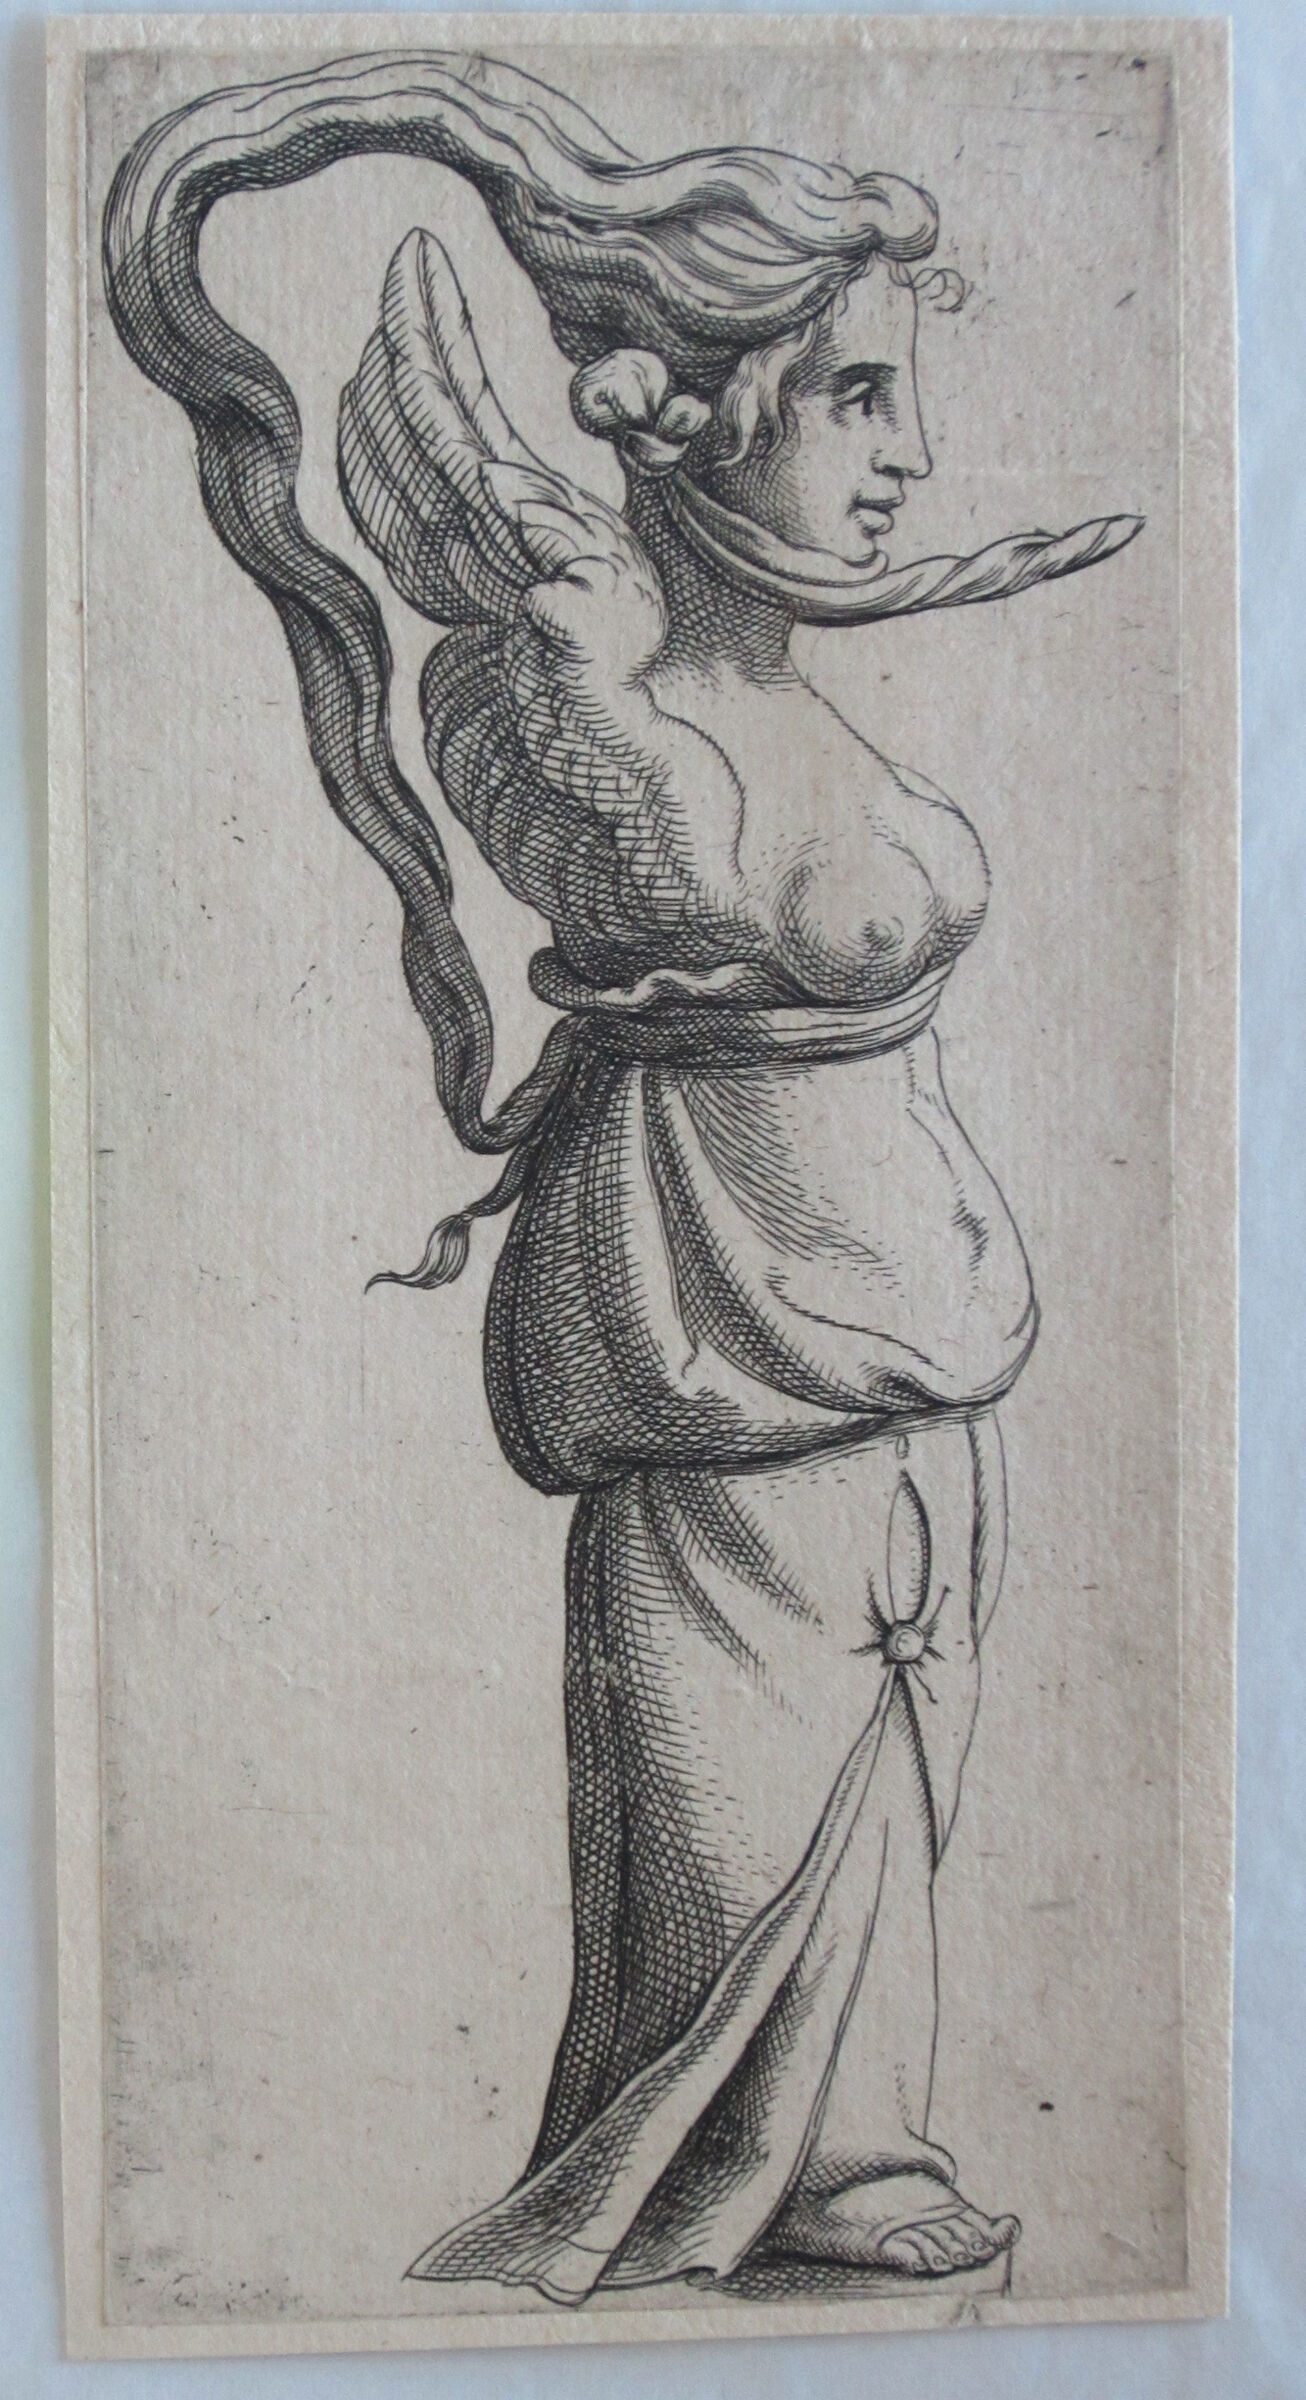 Ewer In The Form Of A Woman With Wings For Arms, The Spout Formed By Her Protruding Veil